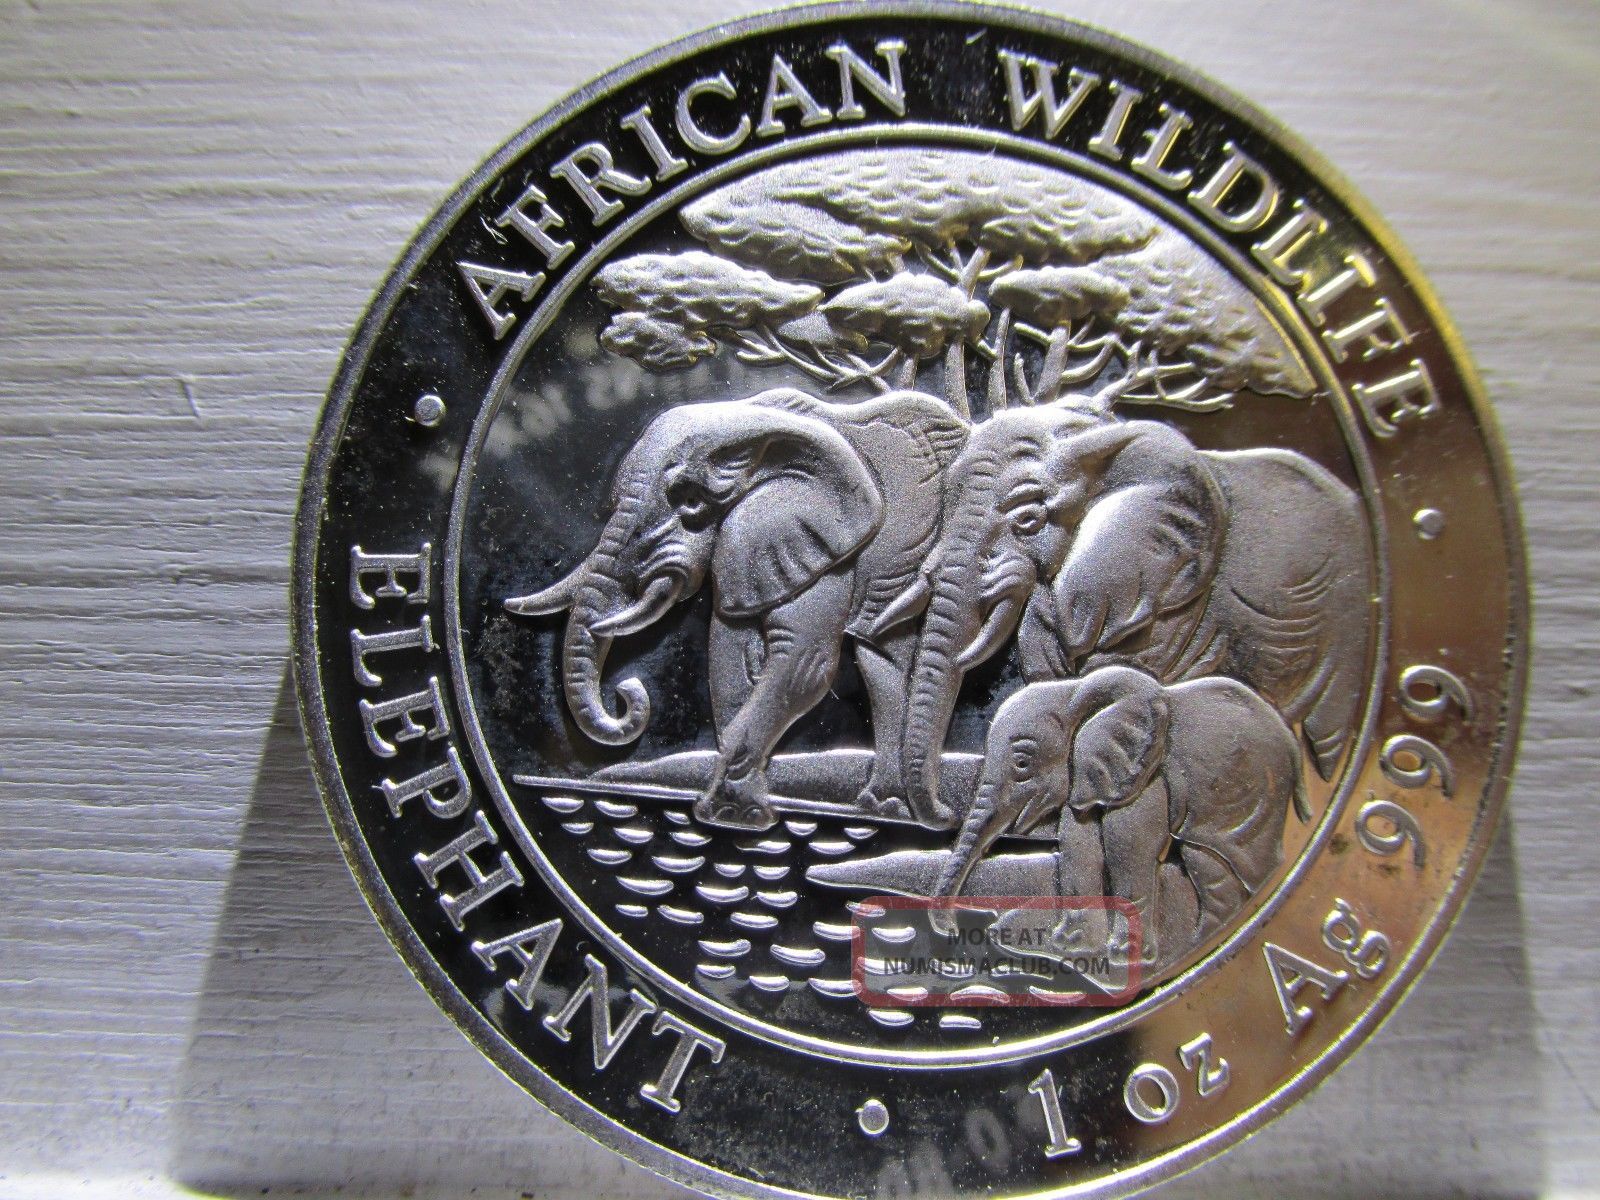 2013 Somali African Wildlife Elephant. 999 Silver Coin Near Perfect